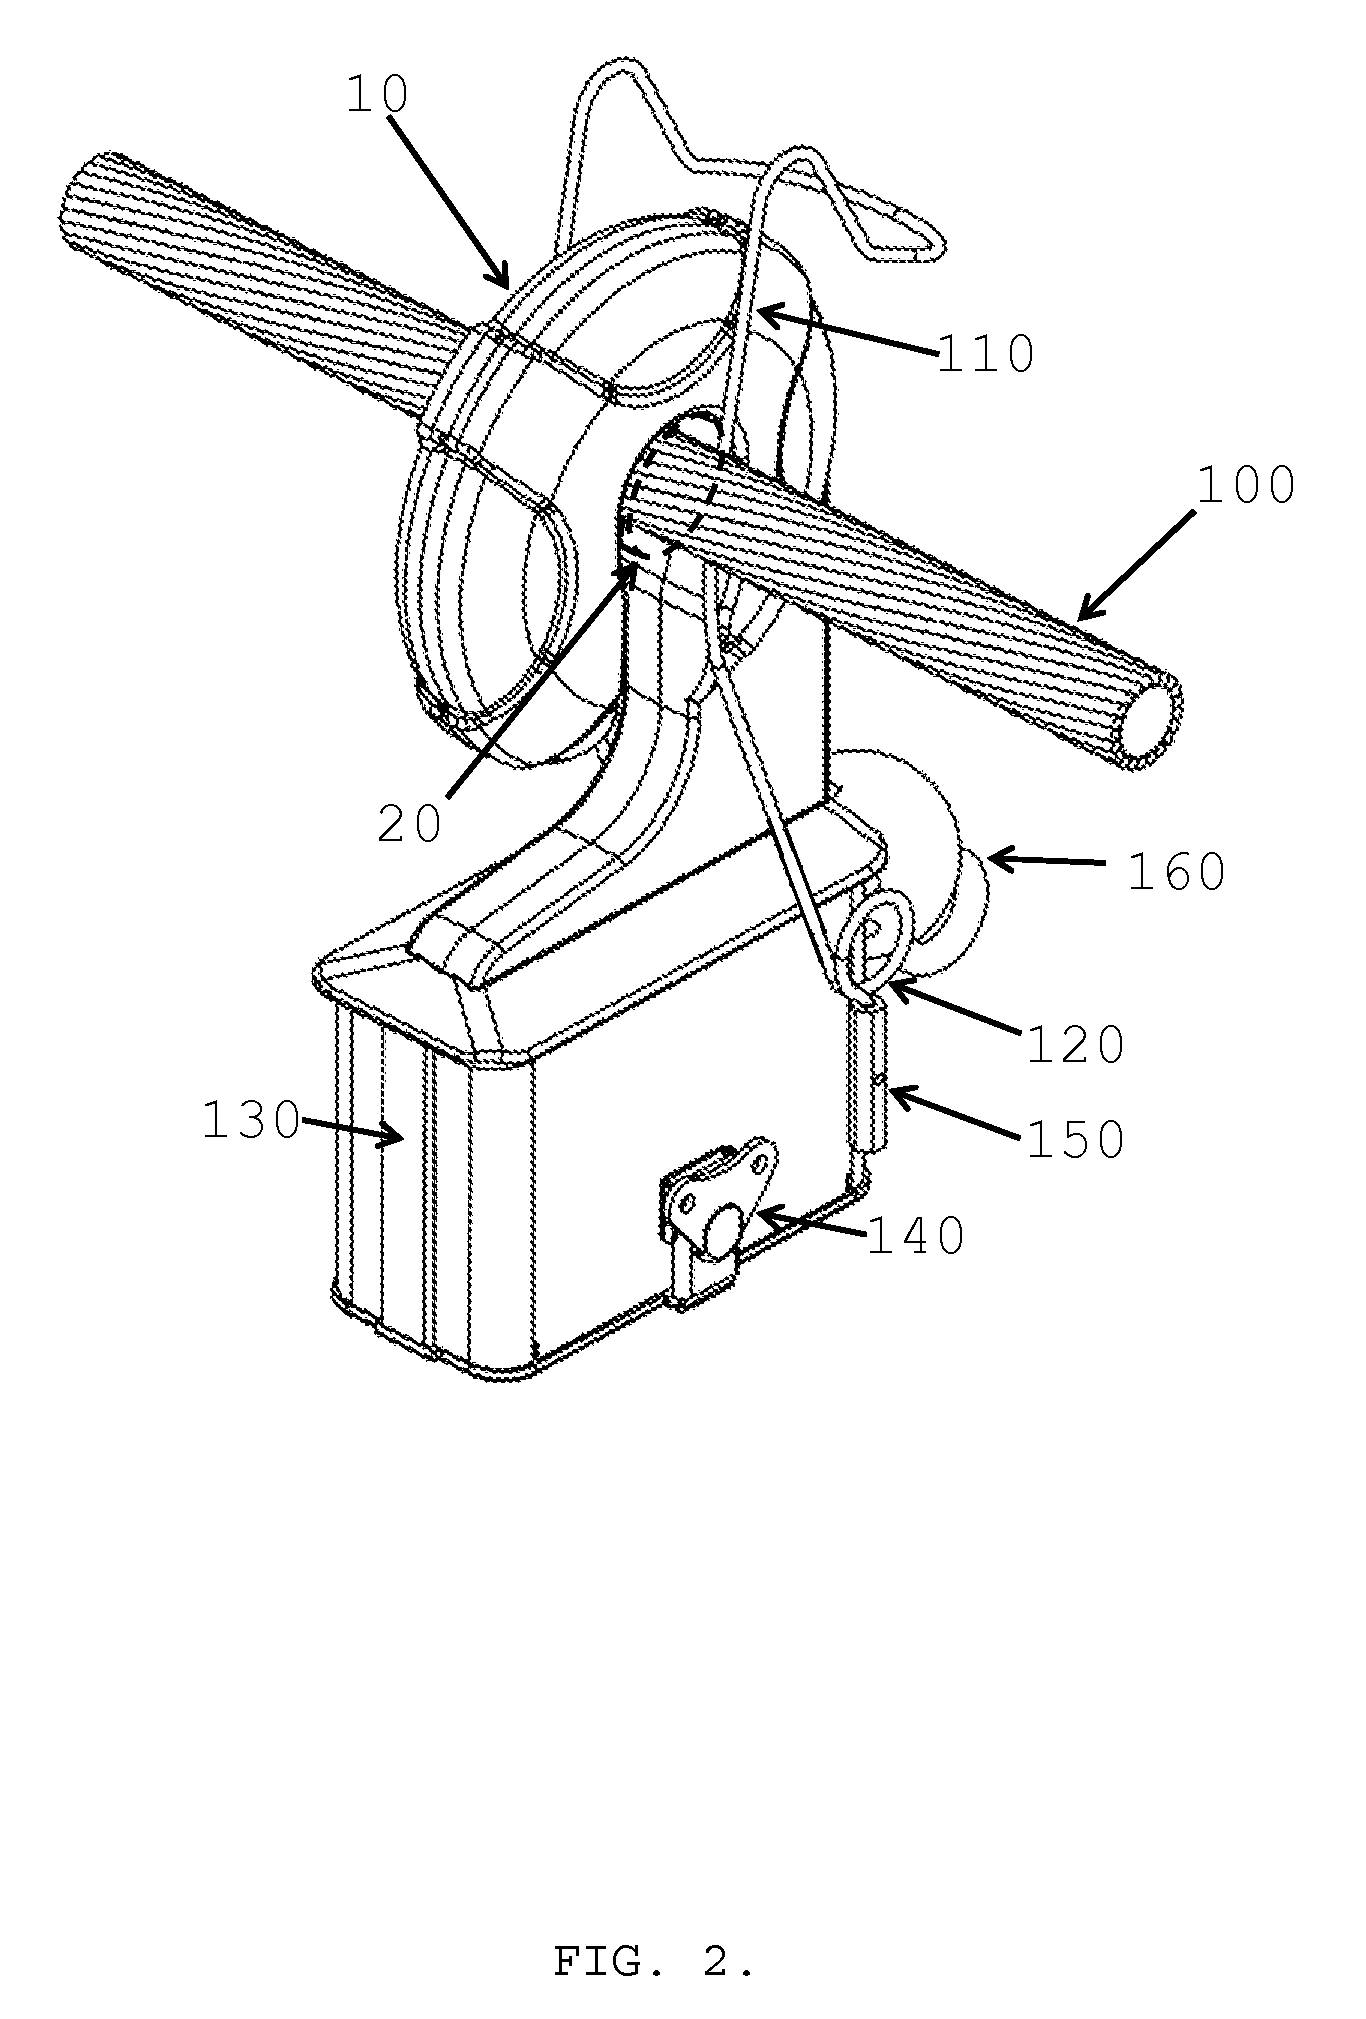 Attachment device and method for fastening electrical cable monitoring instruments to electrical cables